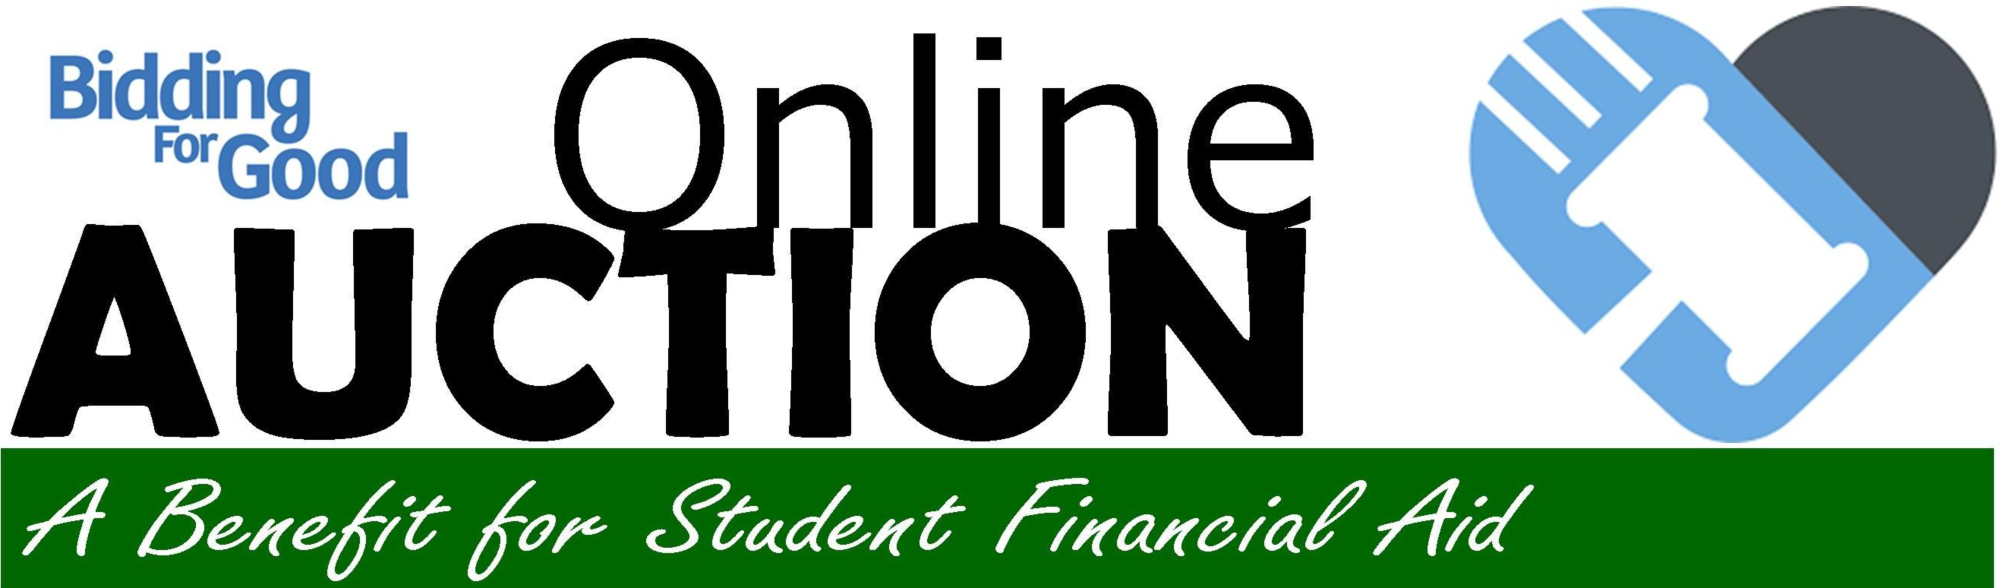 Online Auction for Student Financial Aid